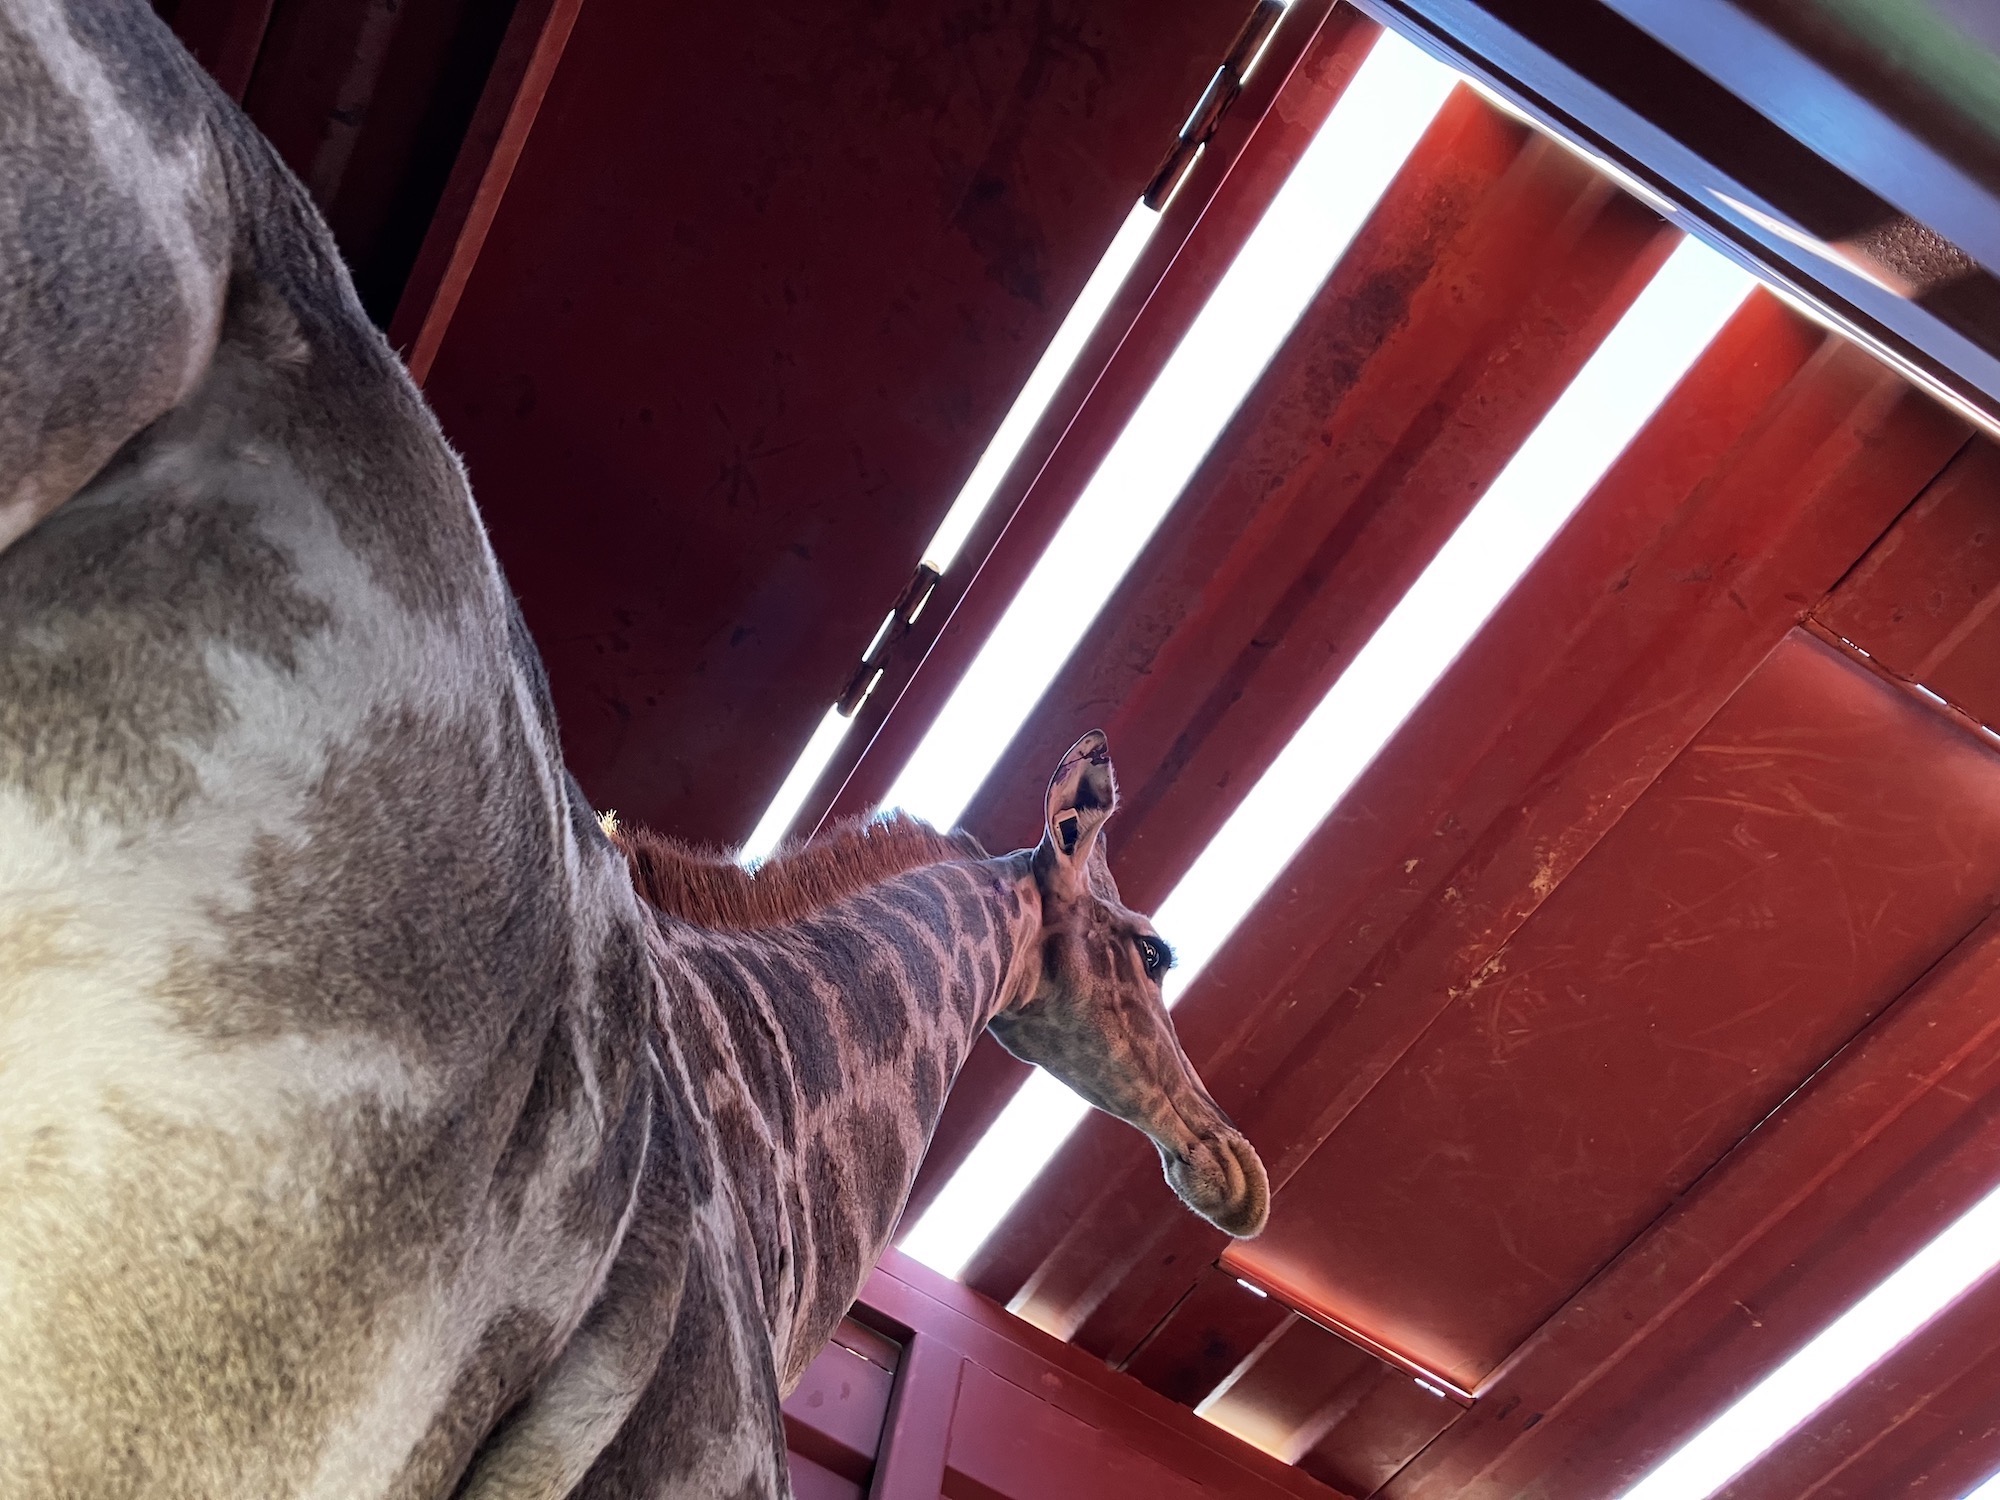 Looking up at a giraffe in the capture truck.